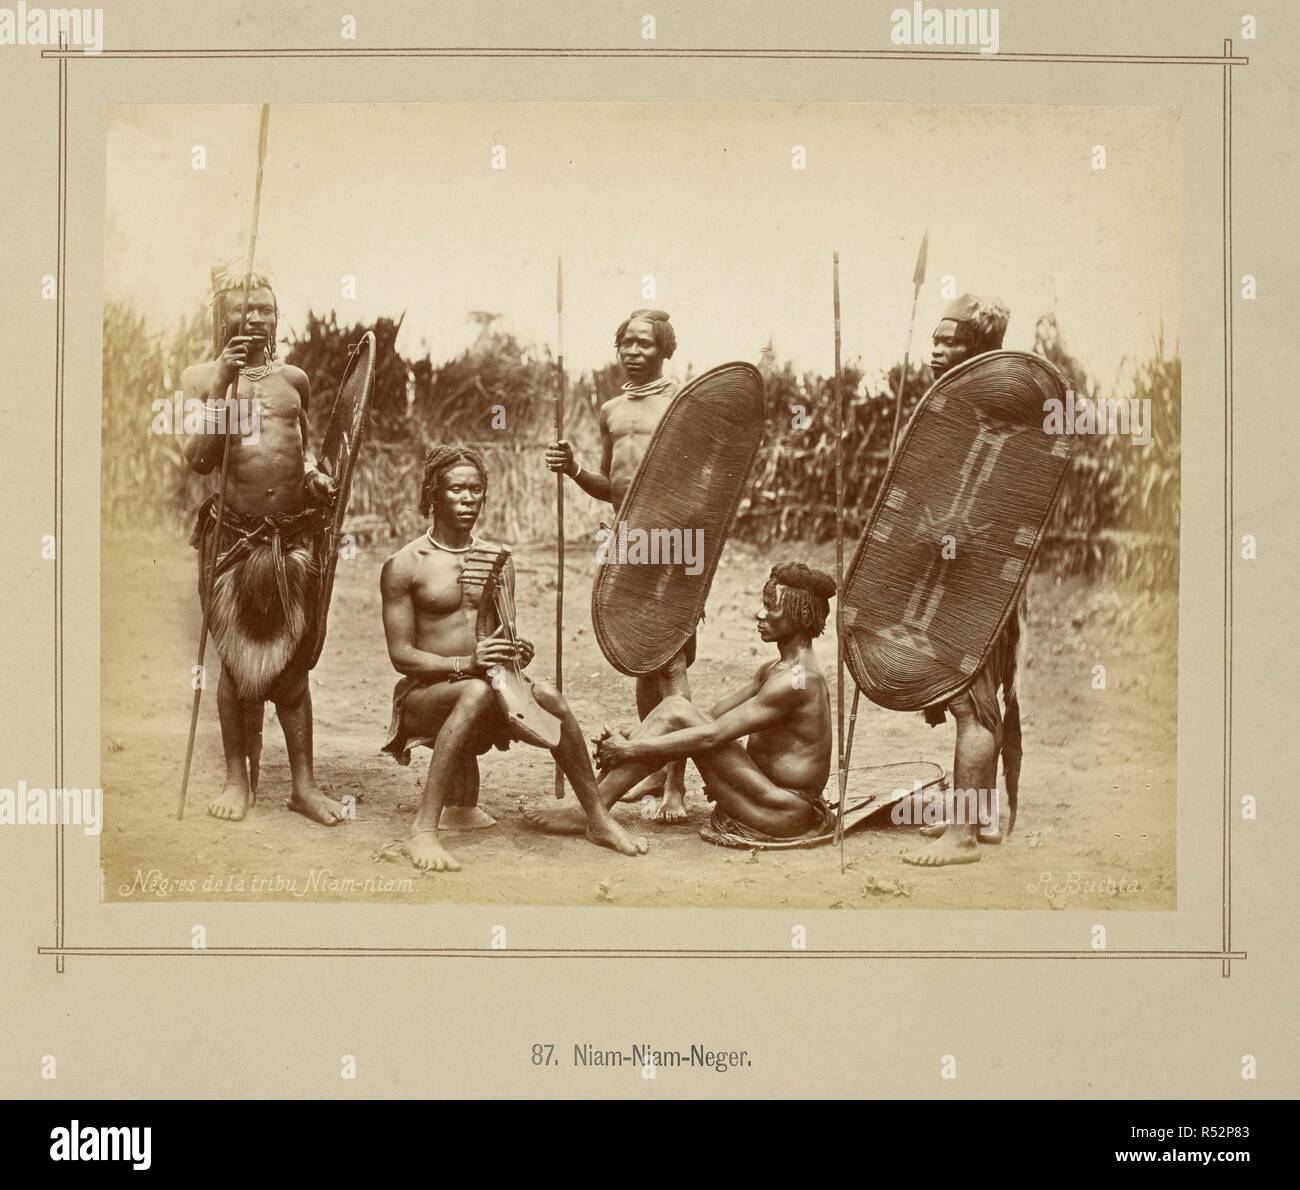 A group of five Zande men, three standing and two seated, one on a carved stool playing a harp, the other on a shield. The standing men are all carrying a spear and shield, two wearing grass-woven hats and one wearing a monkey skin in front of his barkcloth.  Southern Sudan. Die oberen Nil-LaÌˆnder. Volkstypen und Landschaften. Dargestellt in 160 Photographien. Nach der Natur aufgenommen von R. Buchta. Mit einer Einleitung von Dr. Robert Hartmann. Berlin, 1881. Source: 1789.a.13 plate 87. Language: German. Author: Buchta, Richard. Stock Photo